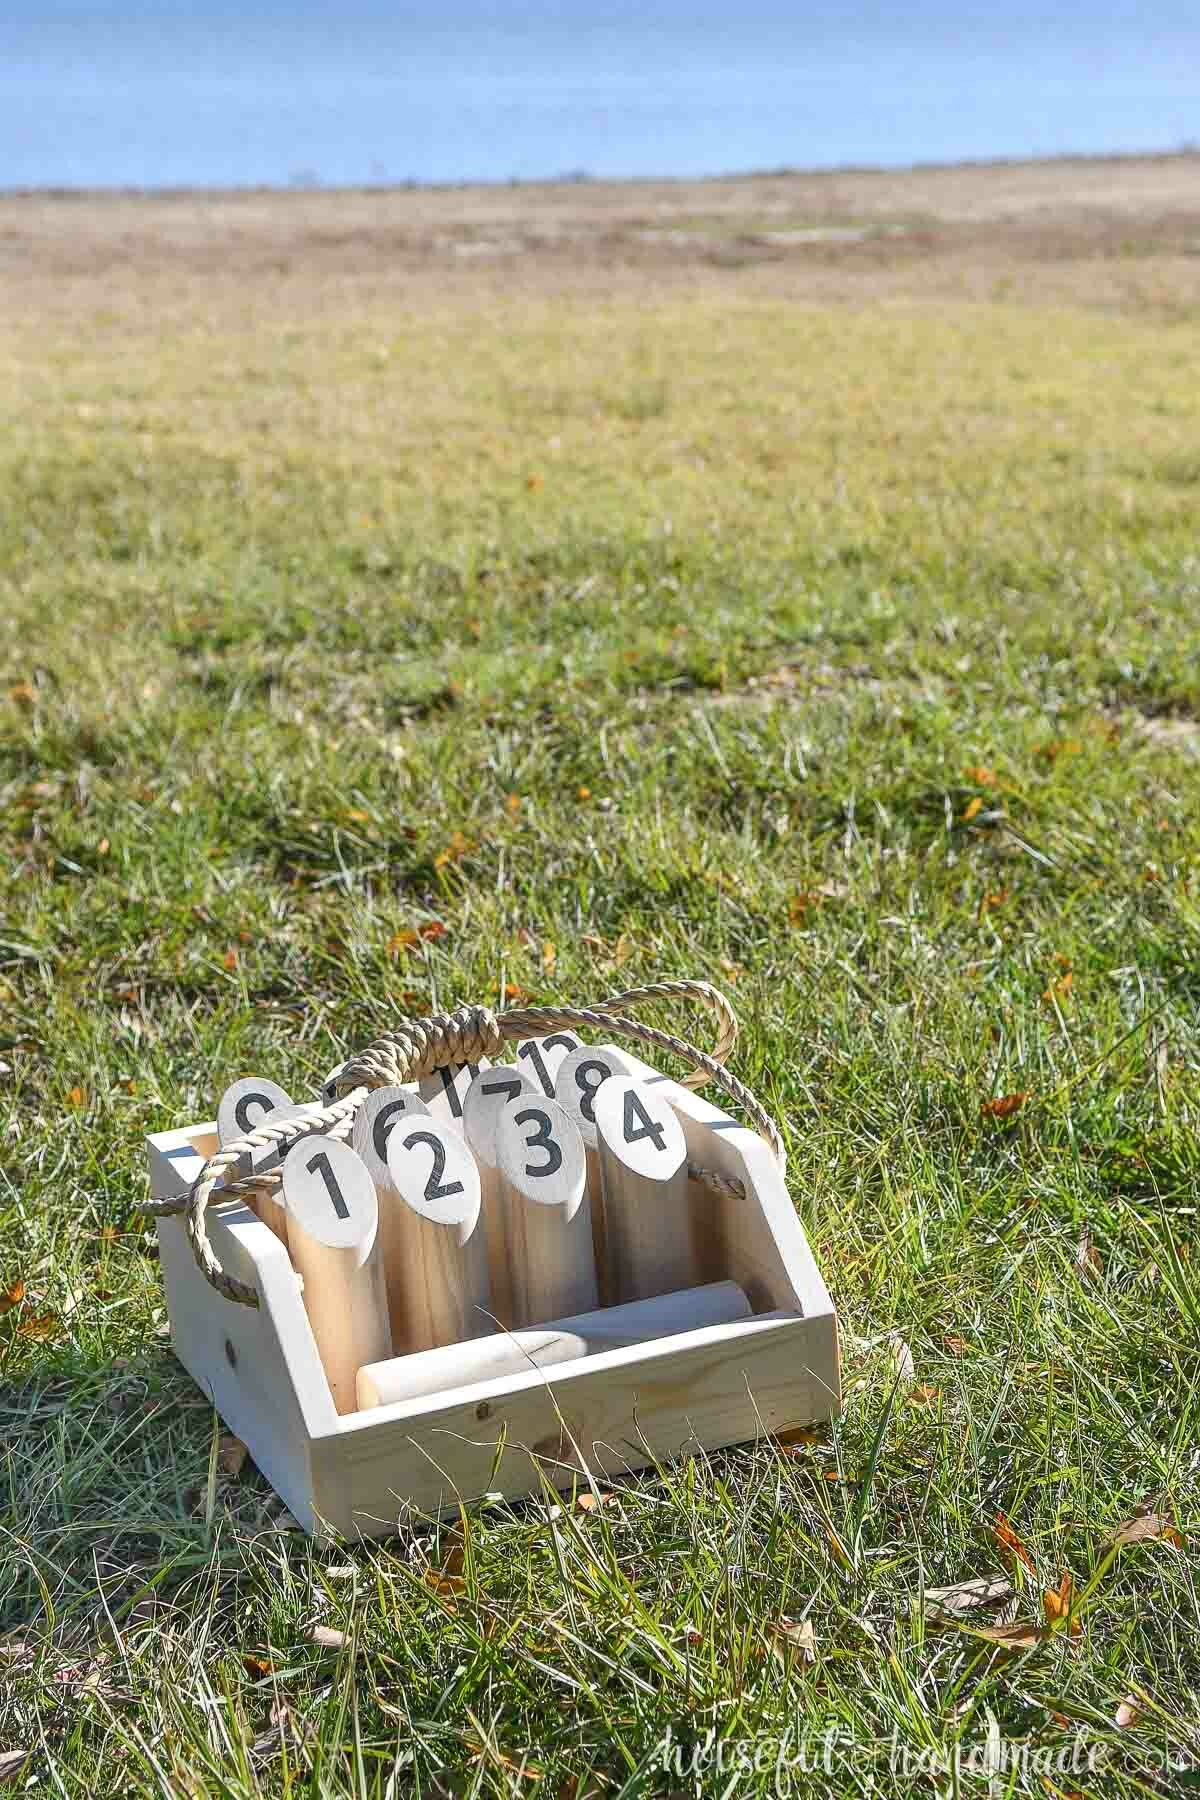 Wood Mölkky set in a custom carrier with a handle sitting on a lawn in front of a lake.